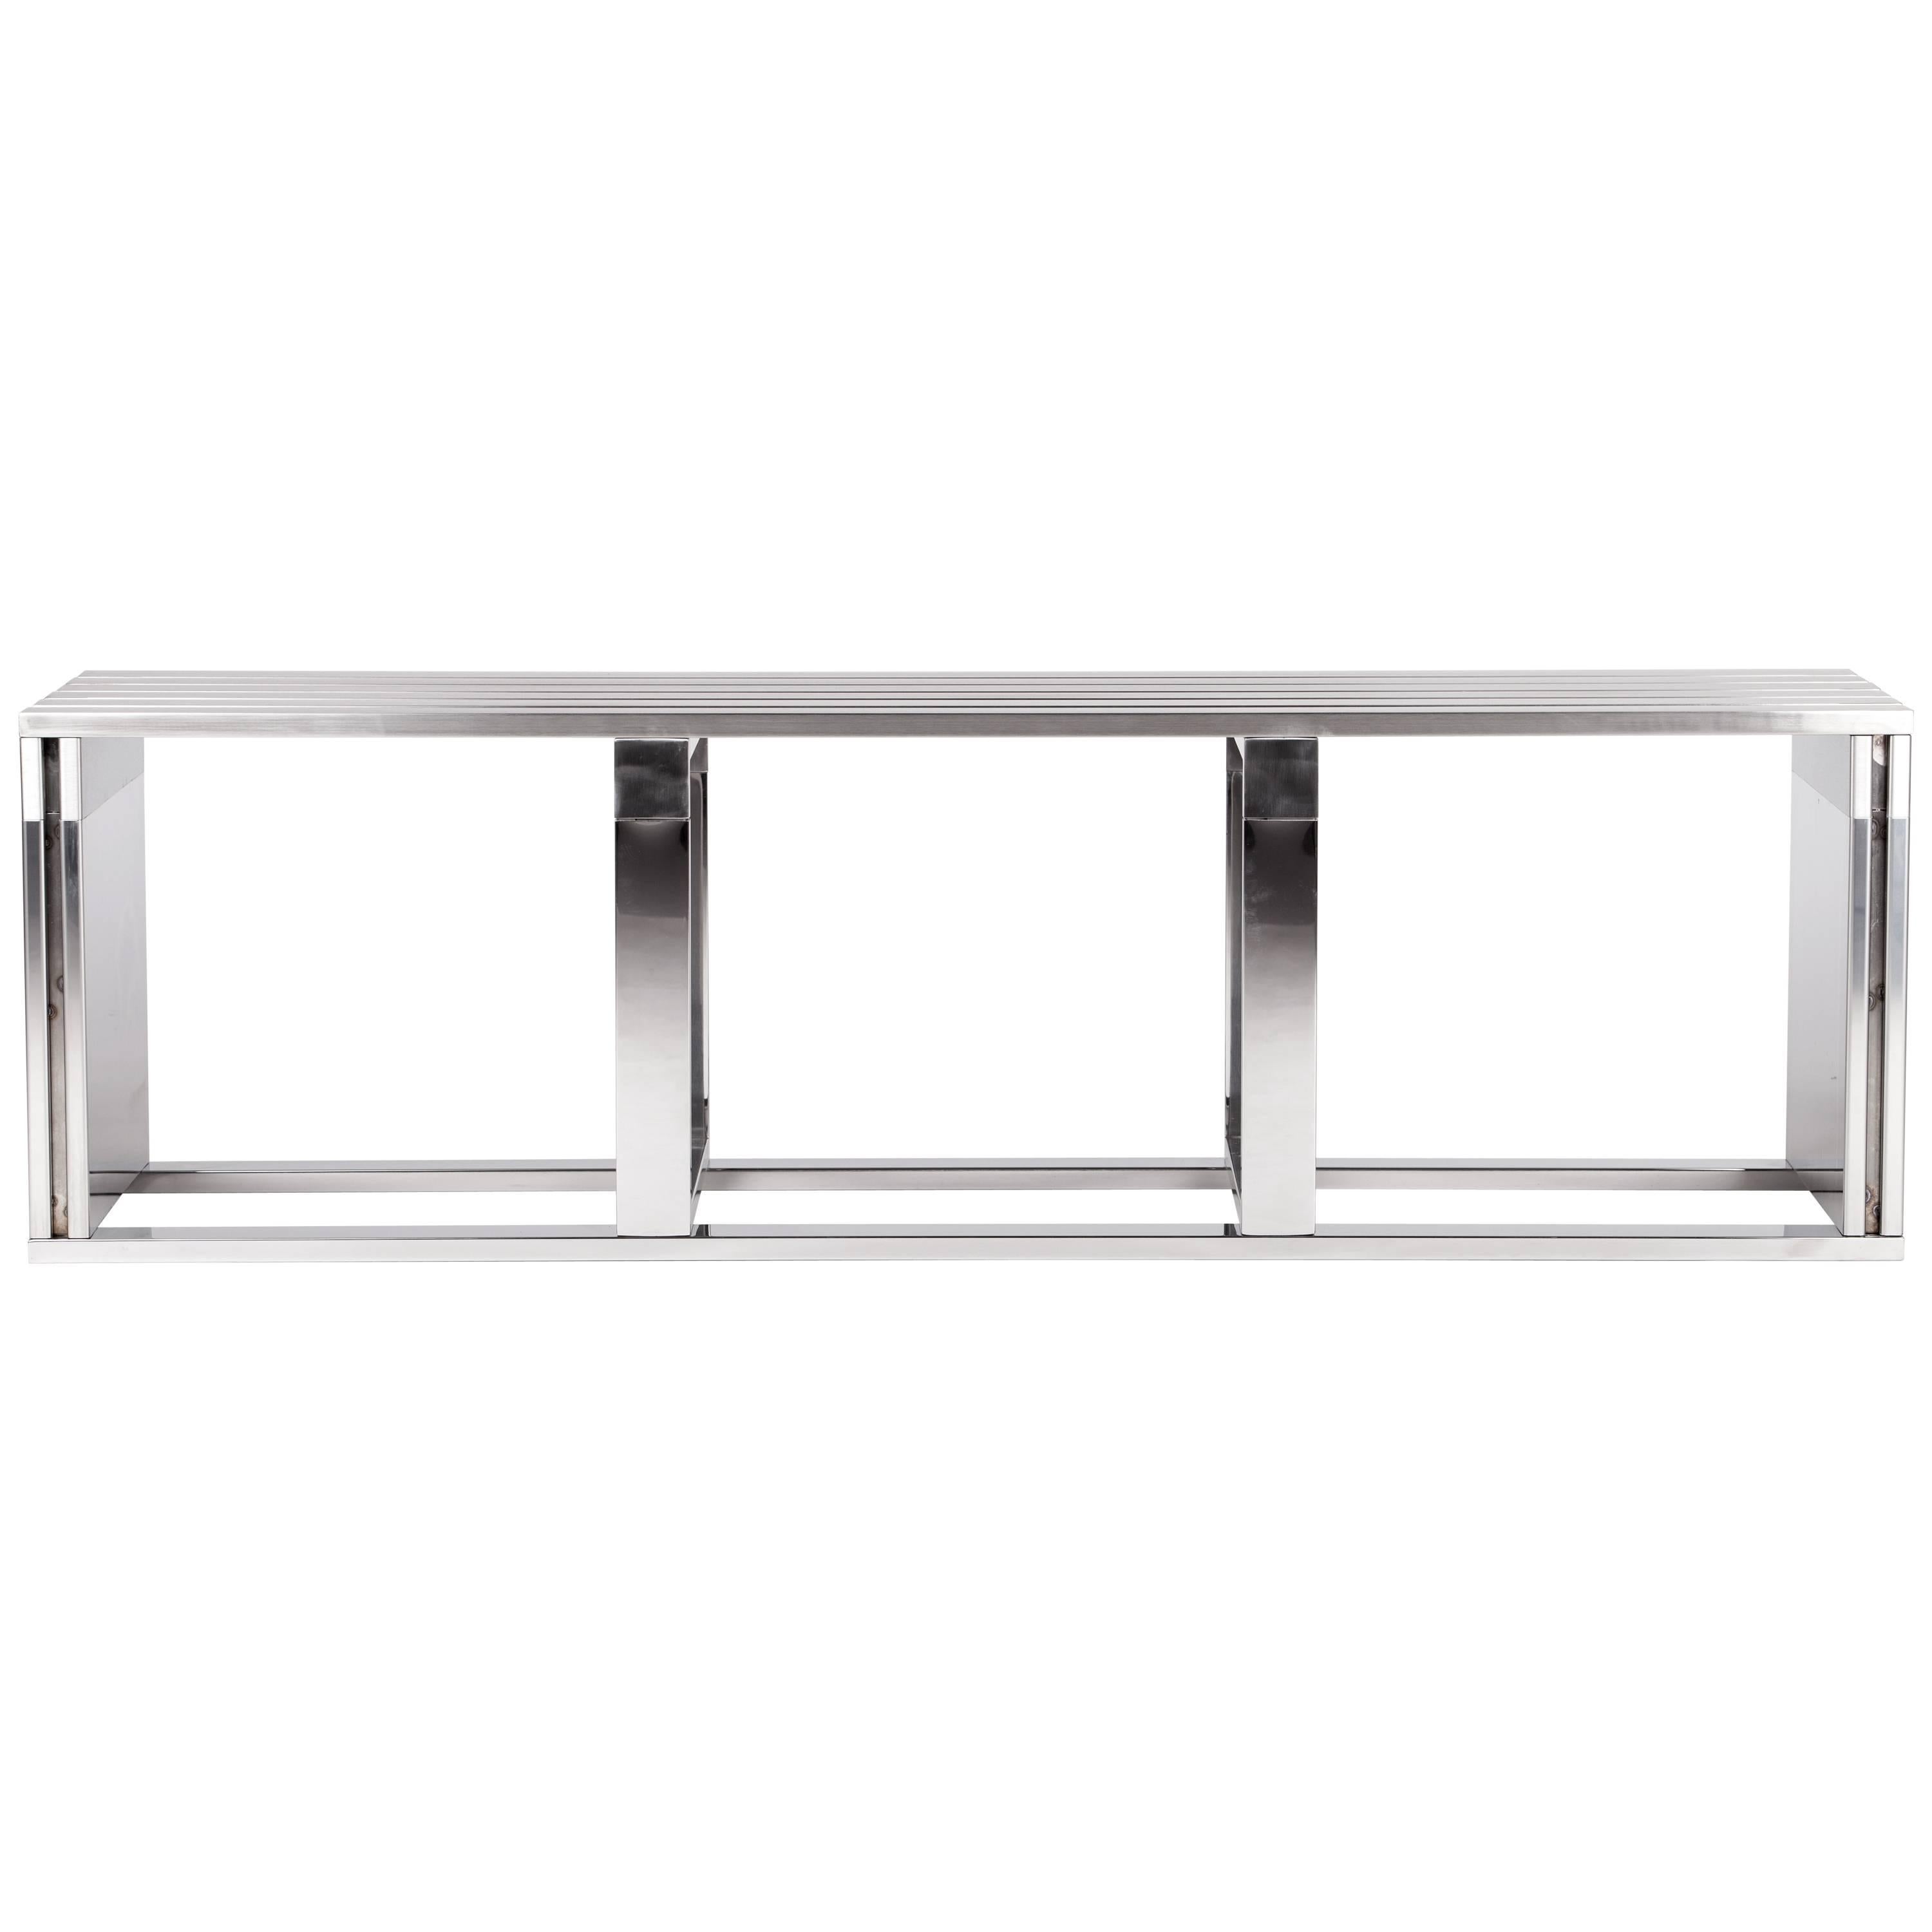 Bicroma Bench in Stainless Steel by Parisotto and Formenton For Sale